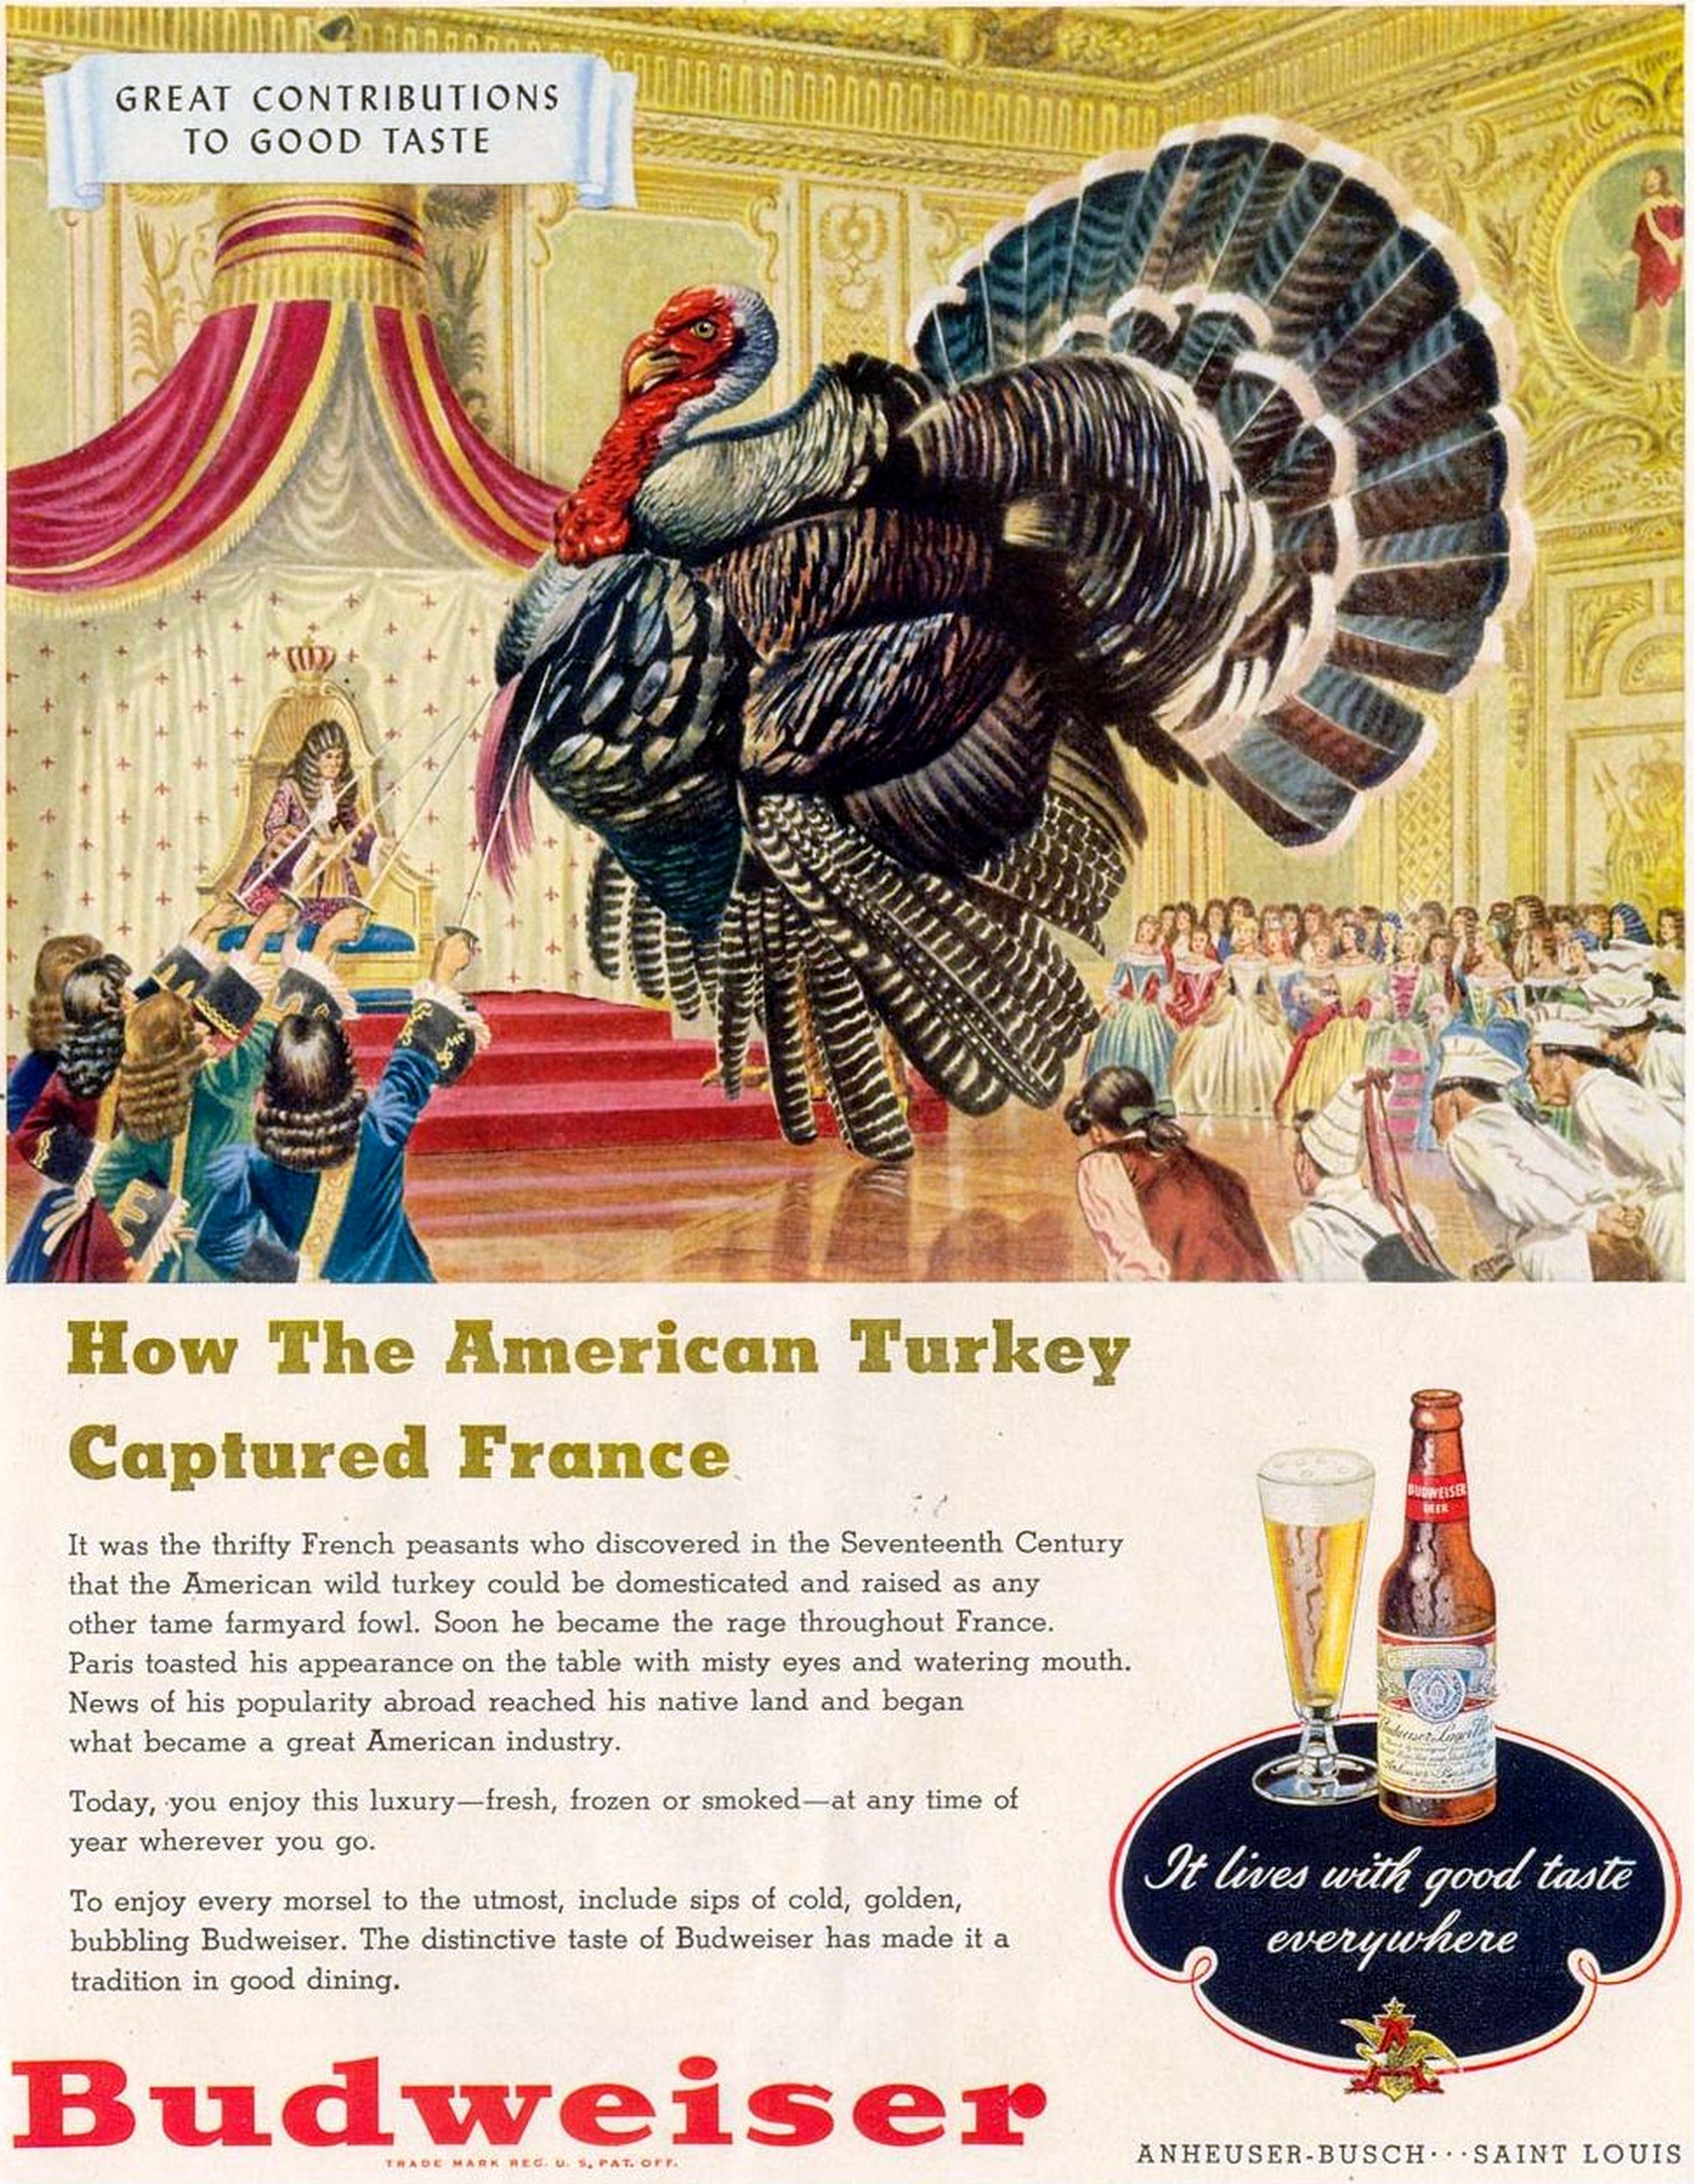 Vintage Thanksgiving Ads Show Us How Things Change, Stay the Same